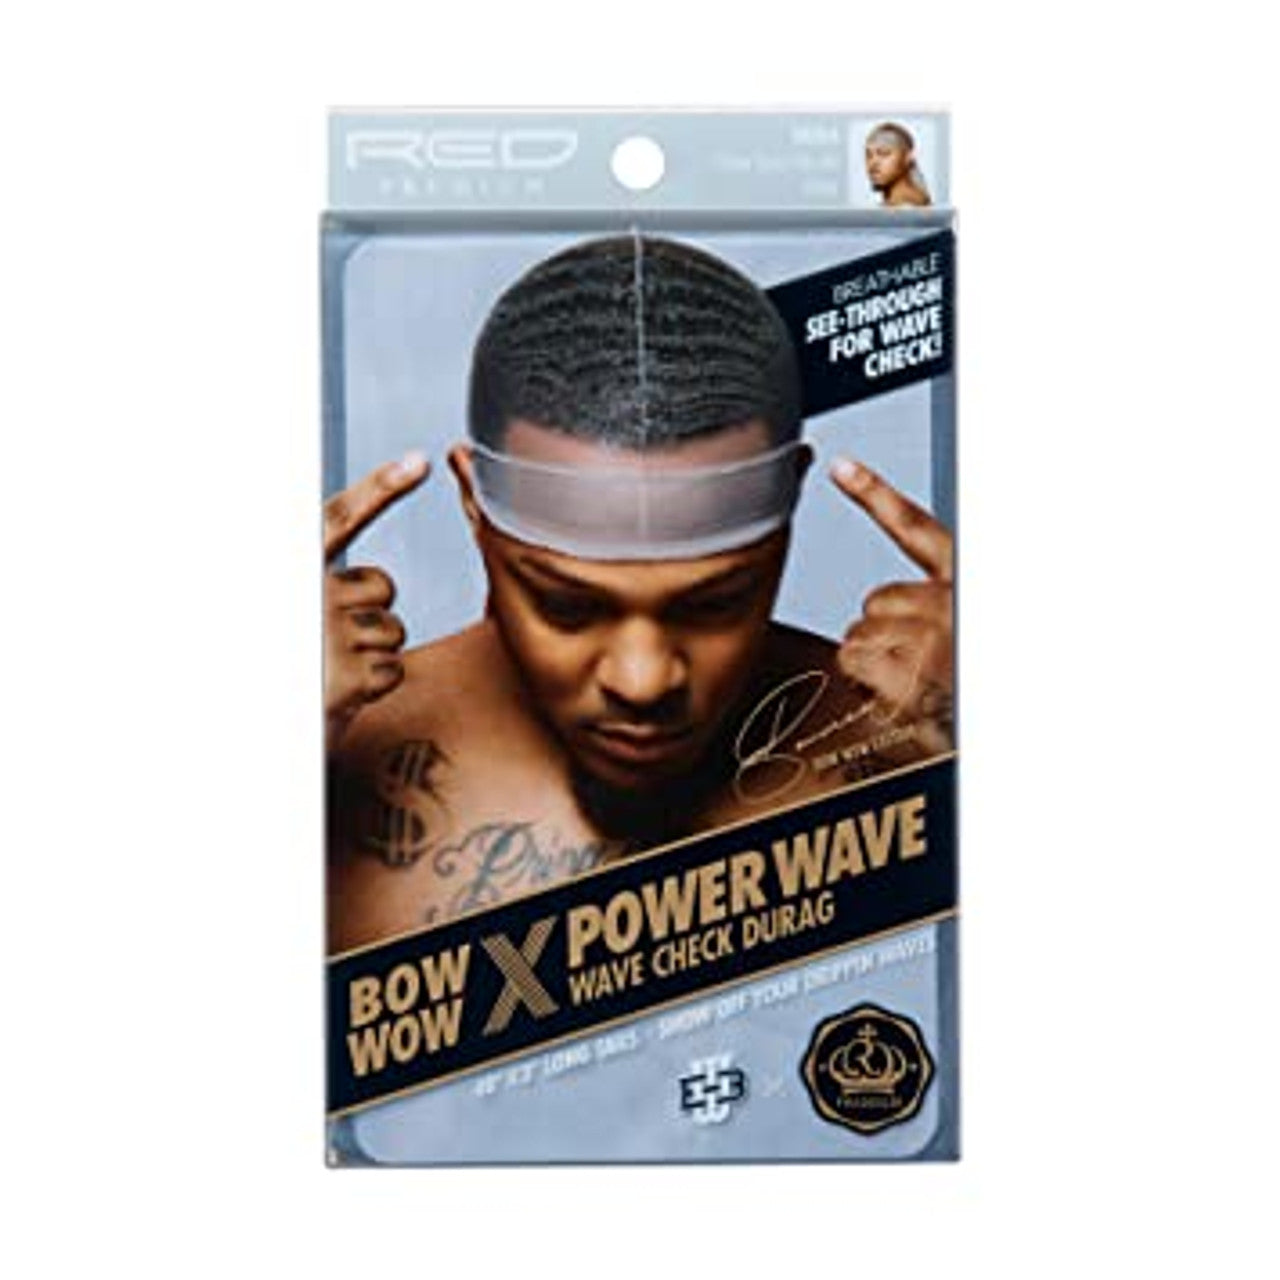 Red Premium Bow Wow X Power Wave Wave Check Durag - Gray - #HD64